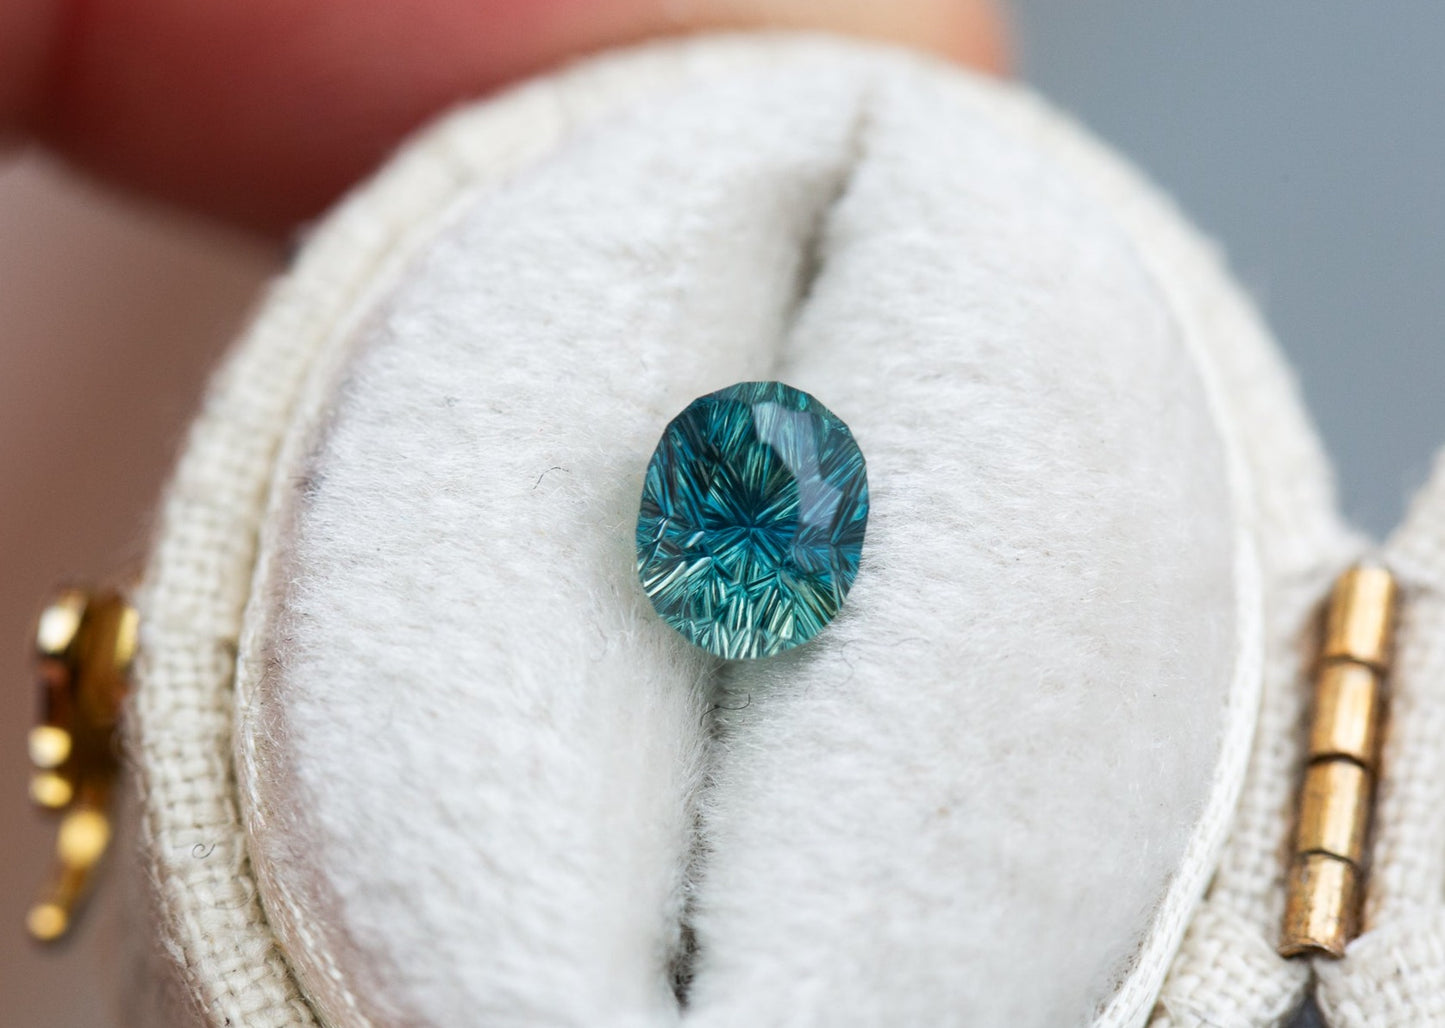 1.3ct teal concave cut sapphire by John Dyer